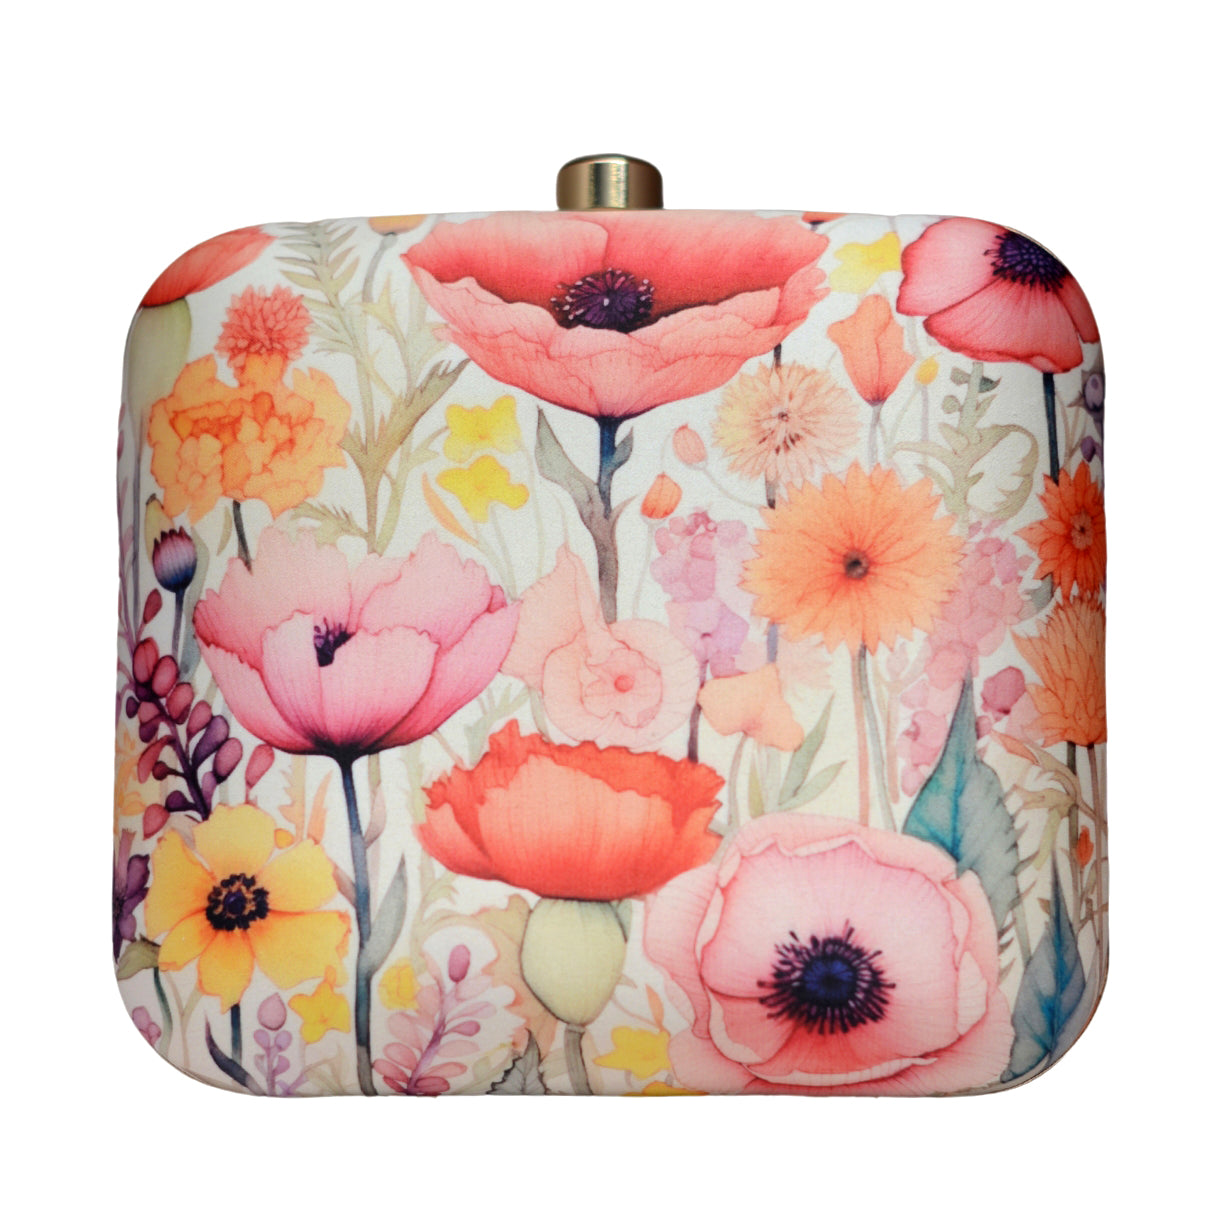 Multicoloured Floral Printed Clutch